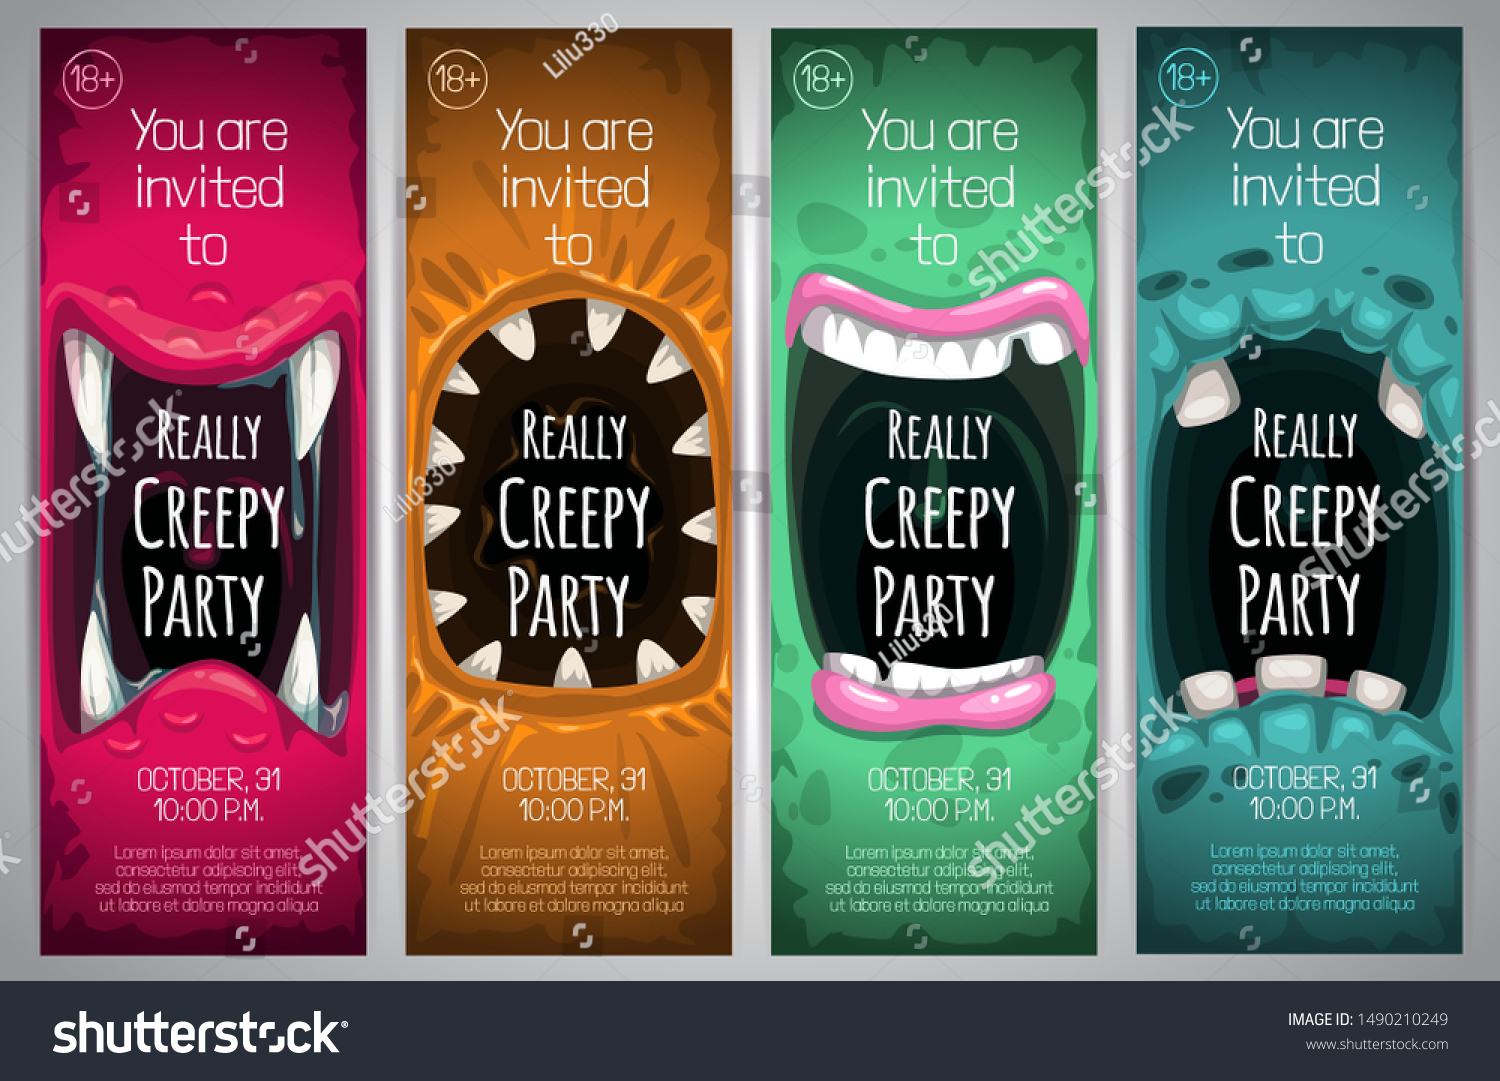 stock-vector-halloween-vertical-banners-with-creepy-monster-mouth-vector-invitation-tickets-templates-1490210249